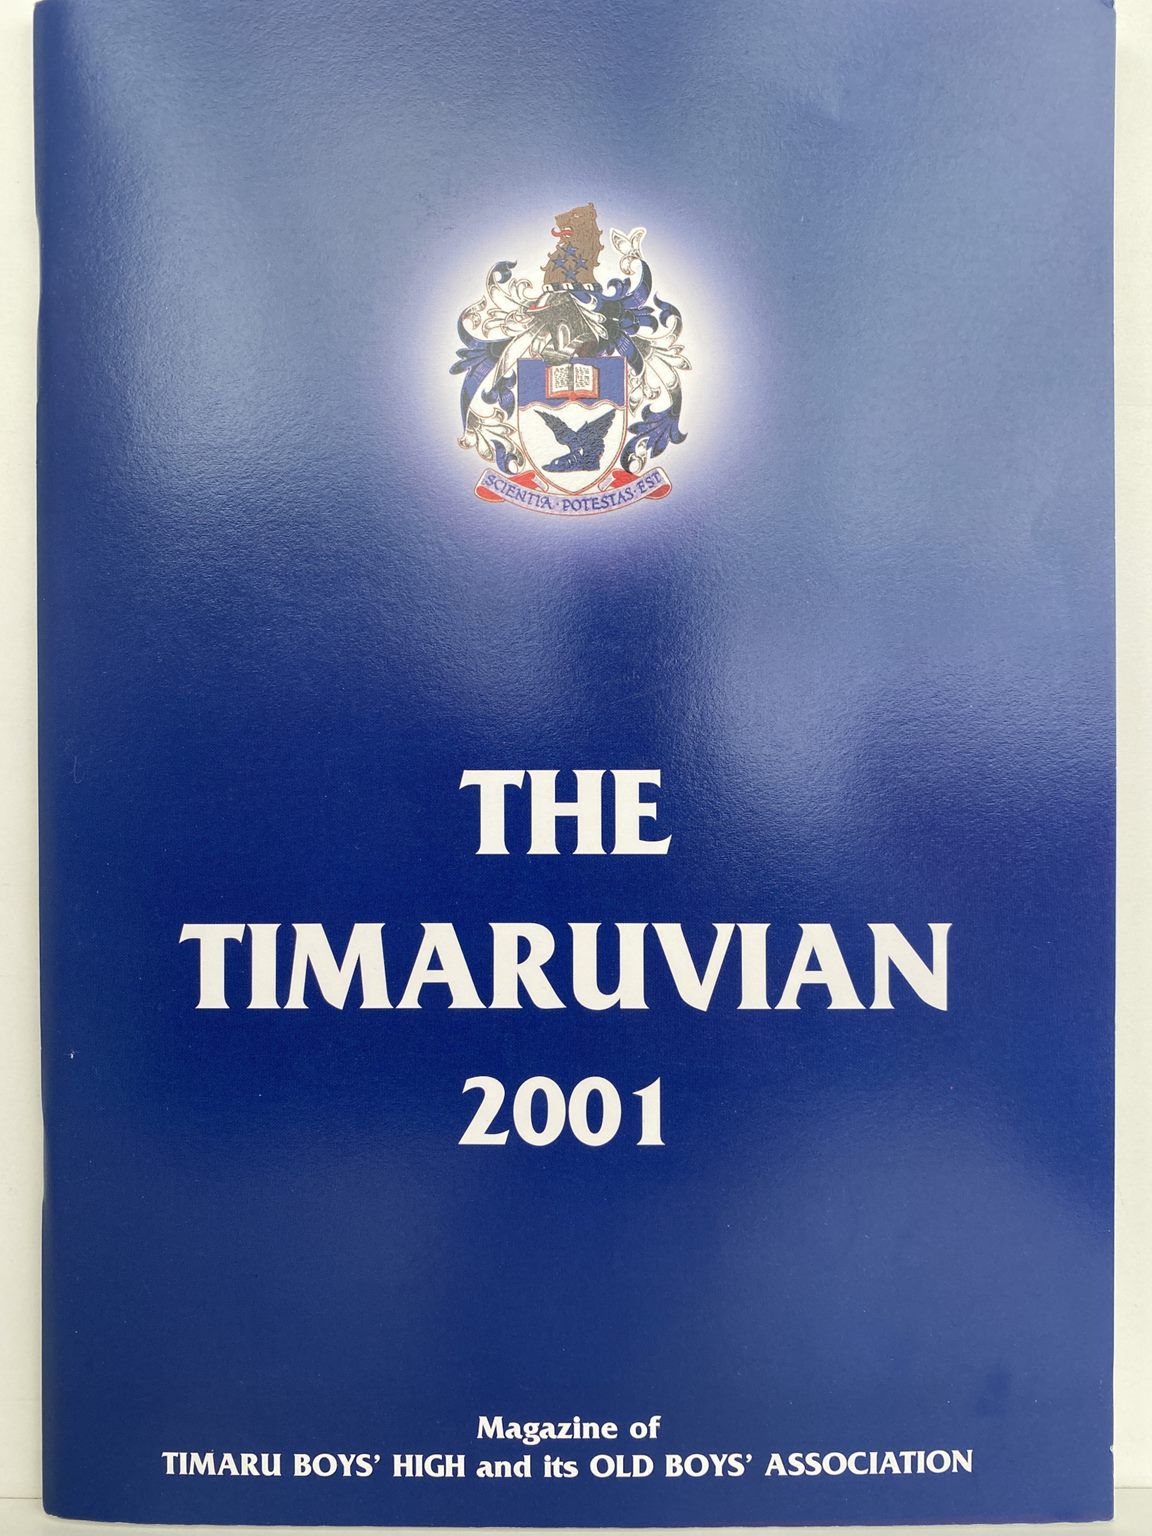 THE TIMARUVIAN: Magazine of the Timaru Boys High School and its Old Boys' Association 2001